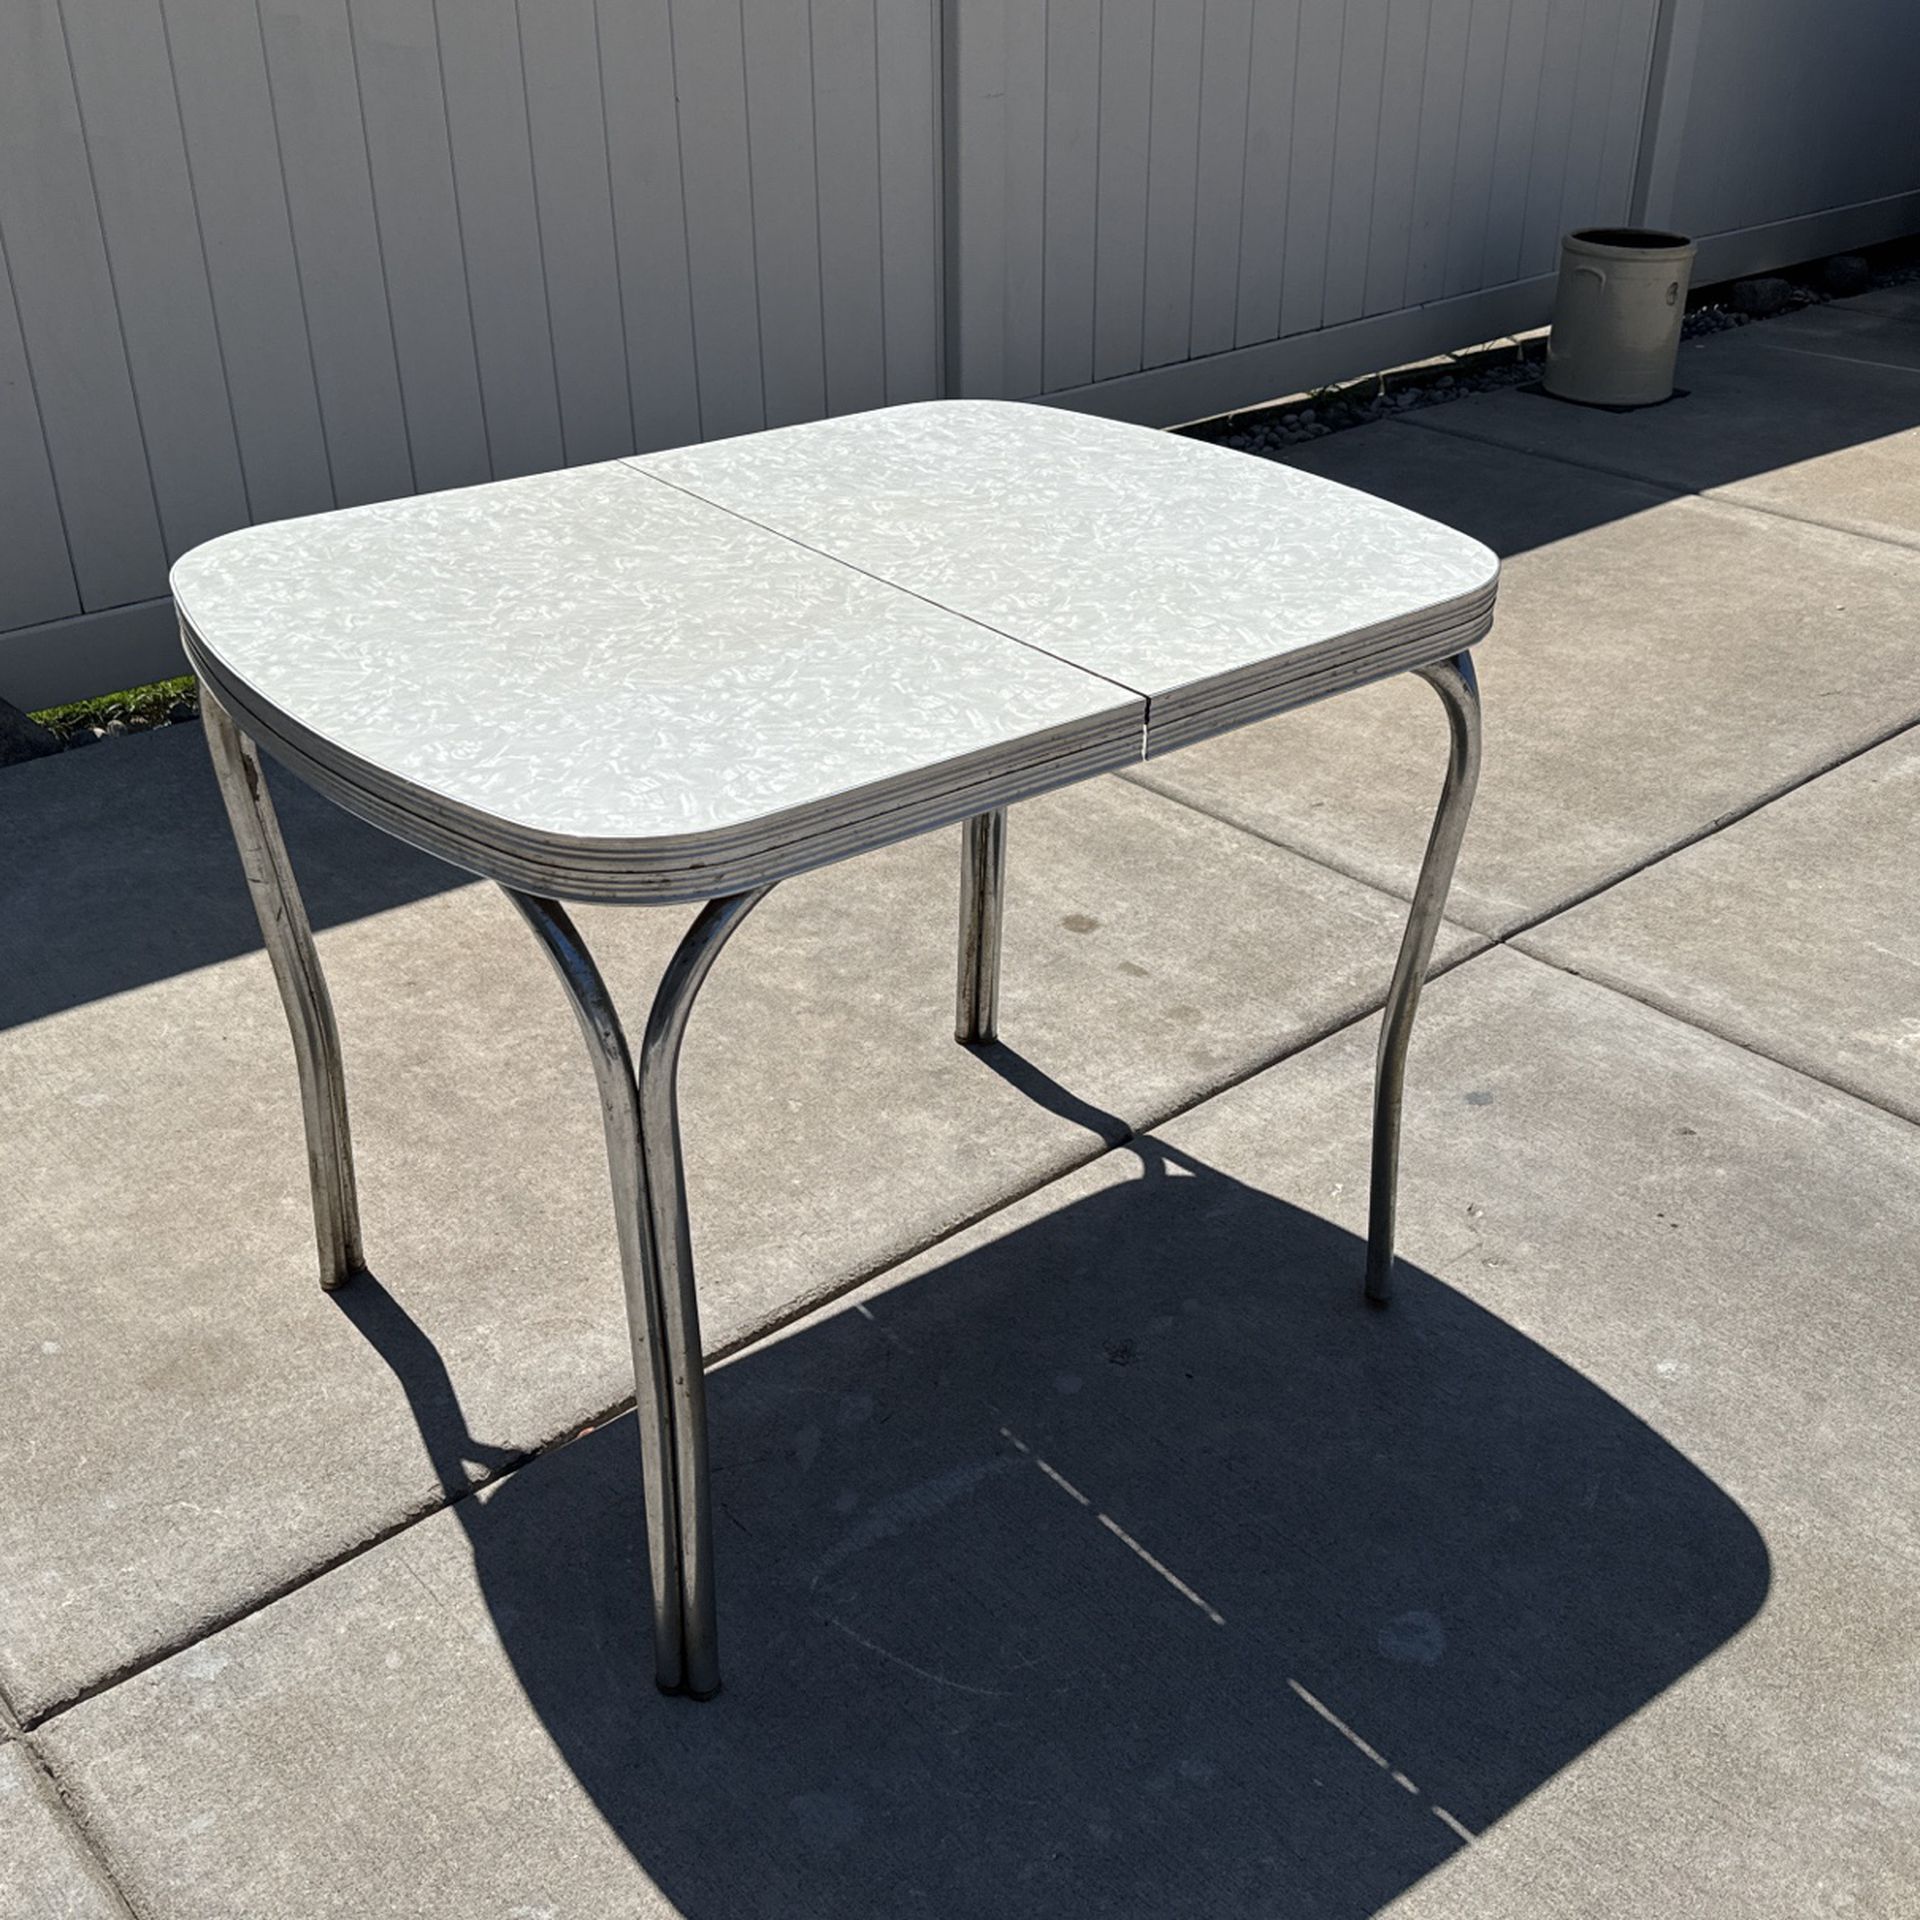 Formica kitchen table 